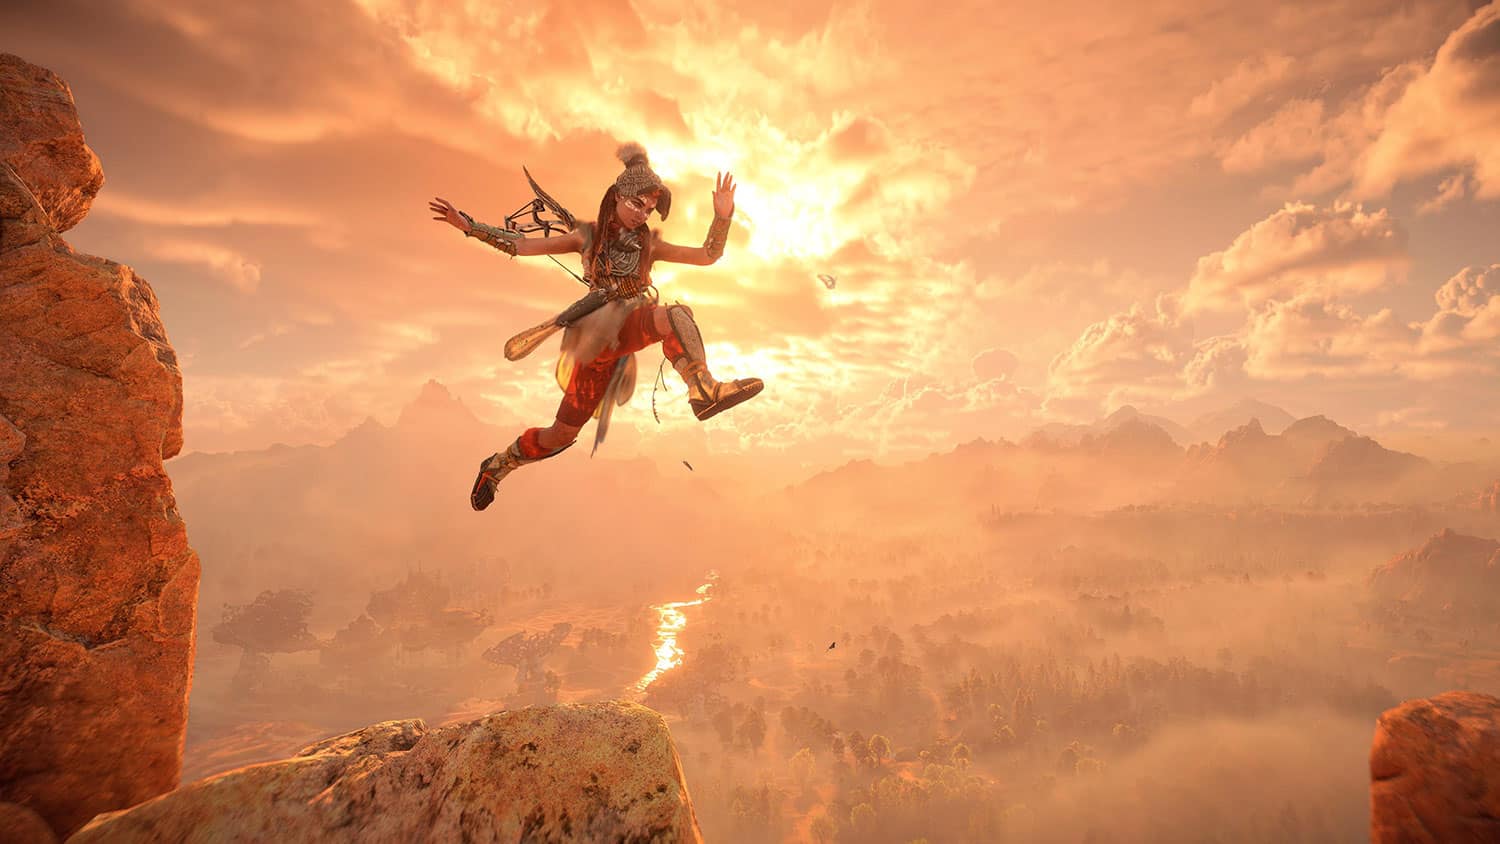 Aloy jumping into the sky in Horizon Forbidden West